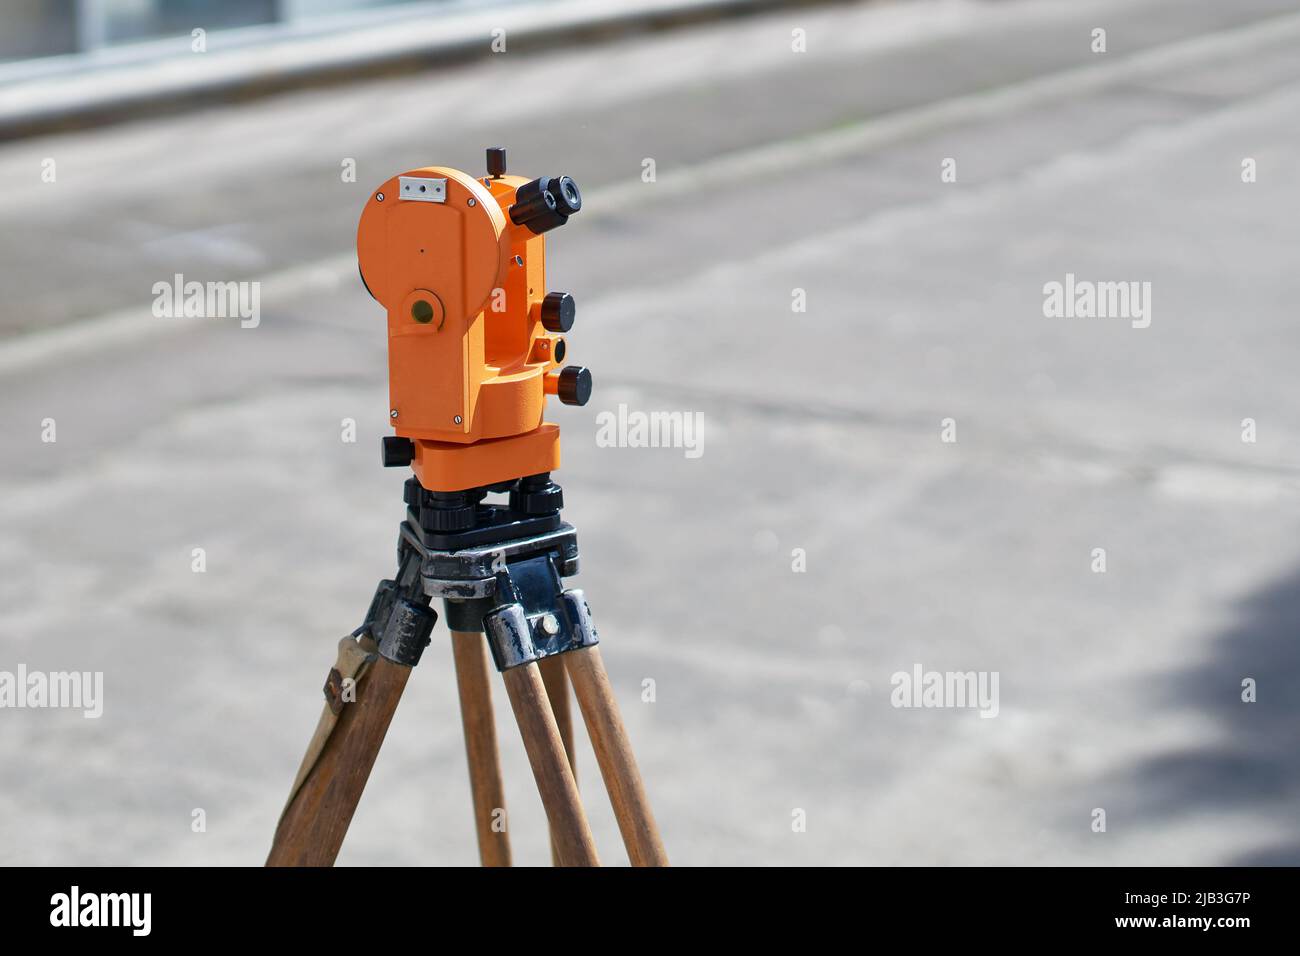 Theodolite a precision optical instrument for measuring angles between designated visible points on a construction site Stock Photo